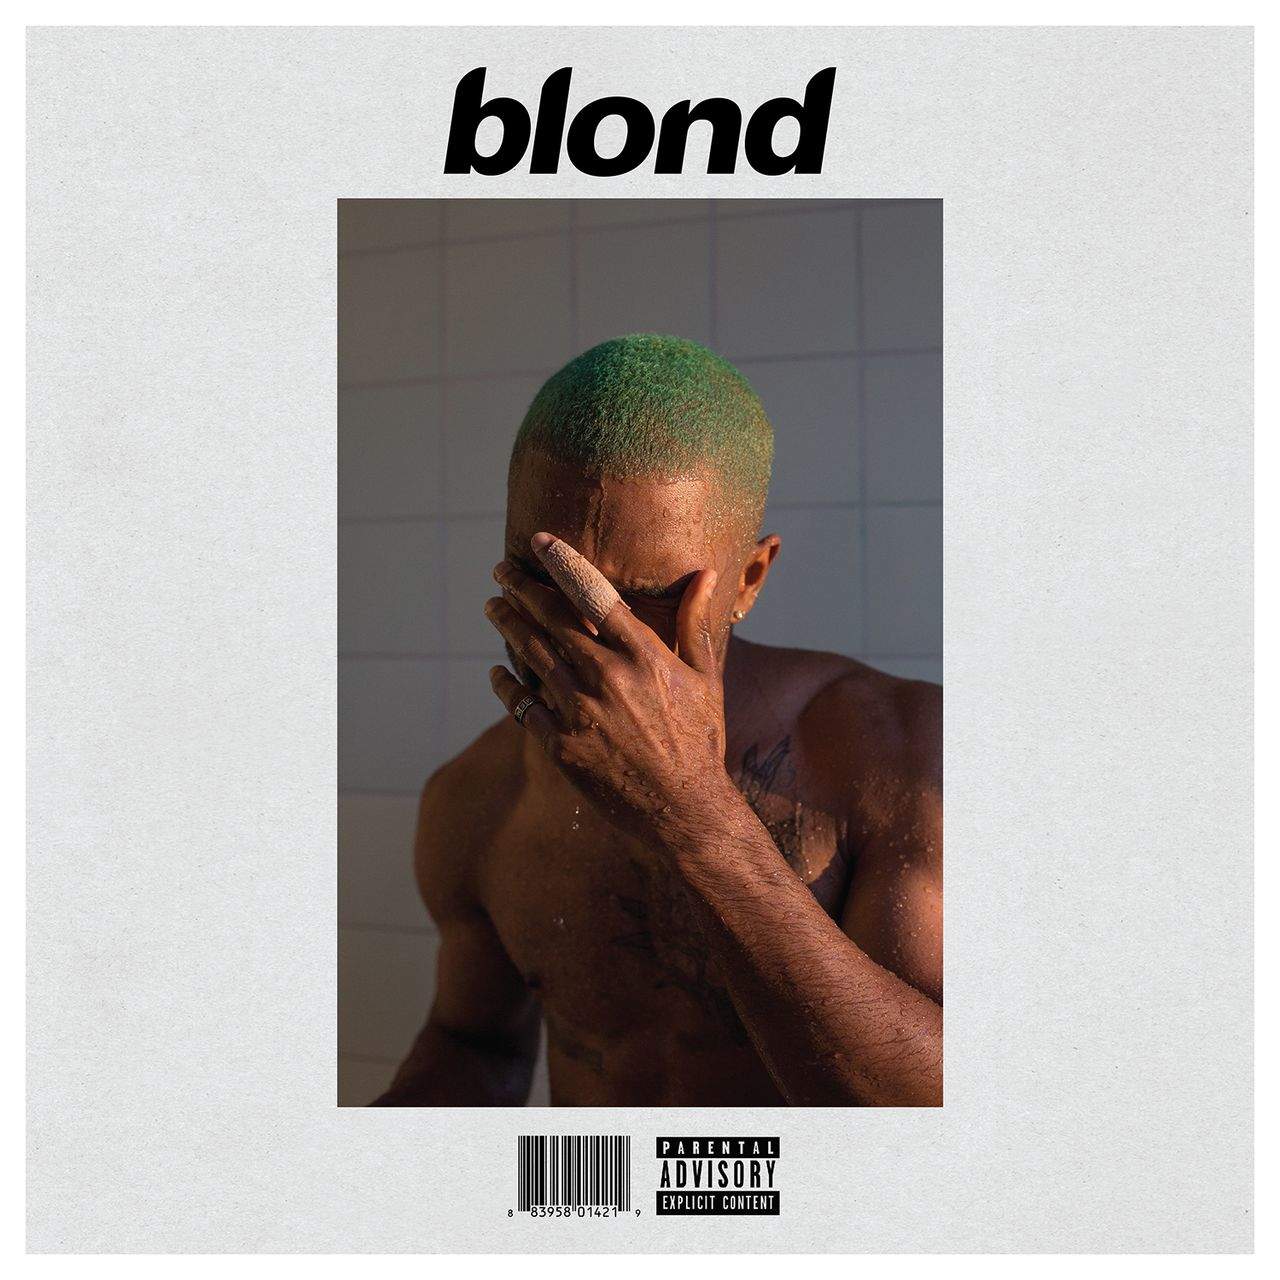 Cover of the album Blonde by Frank Ocean